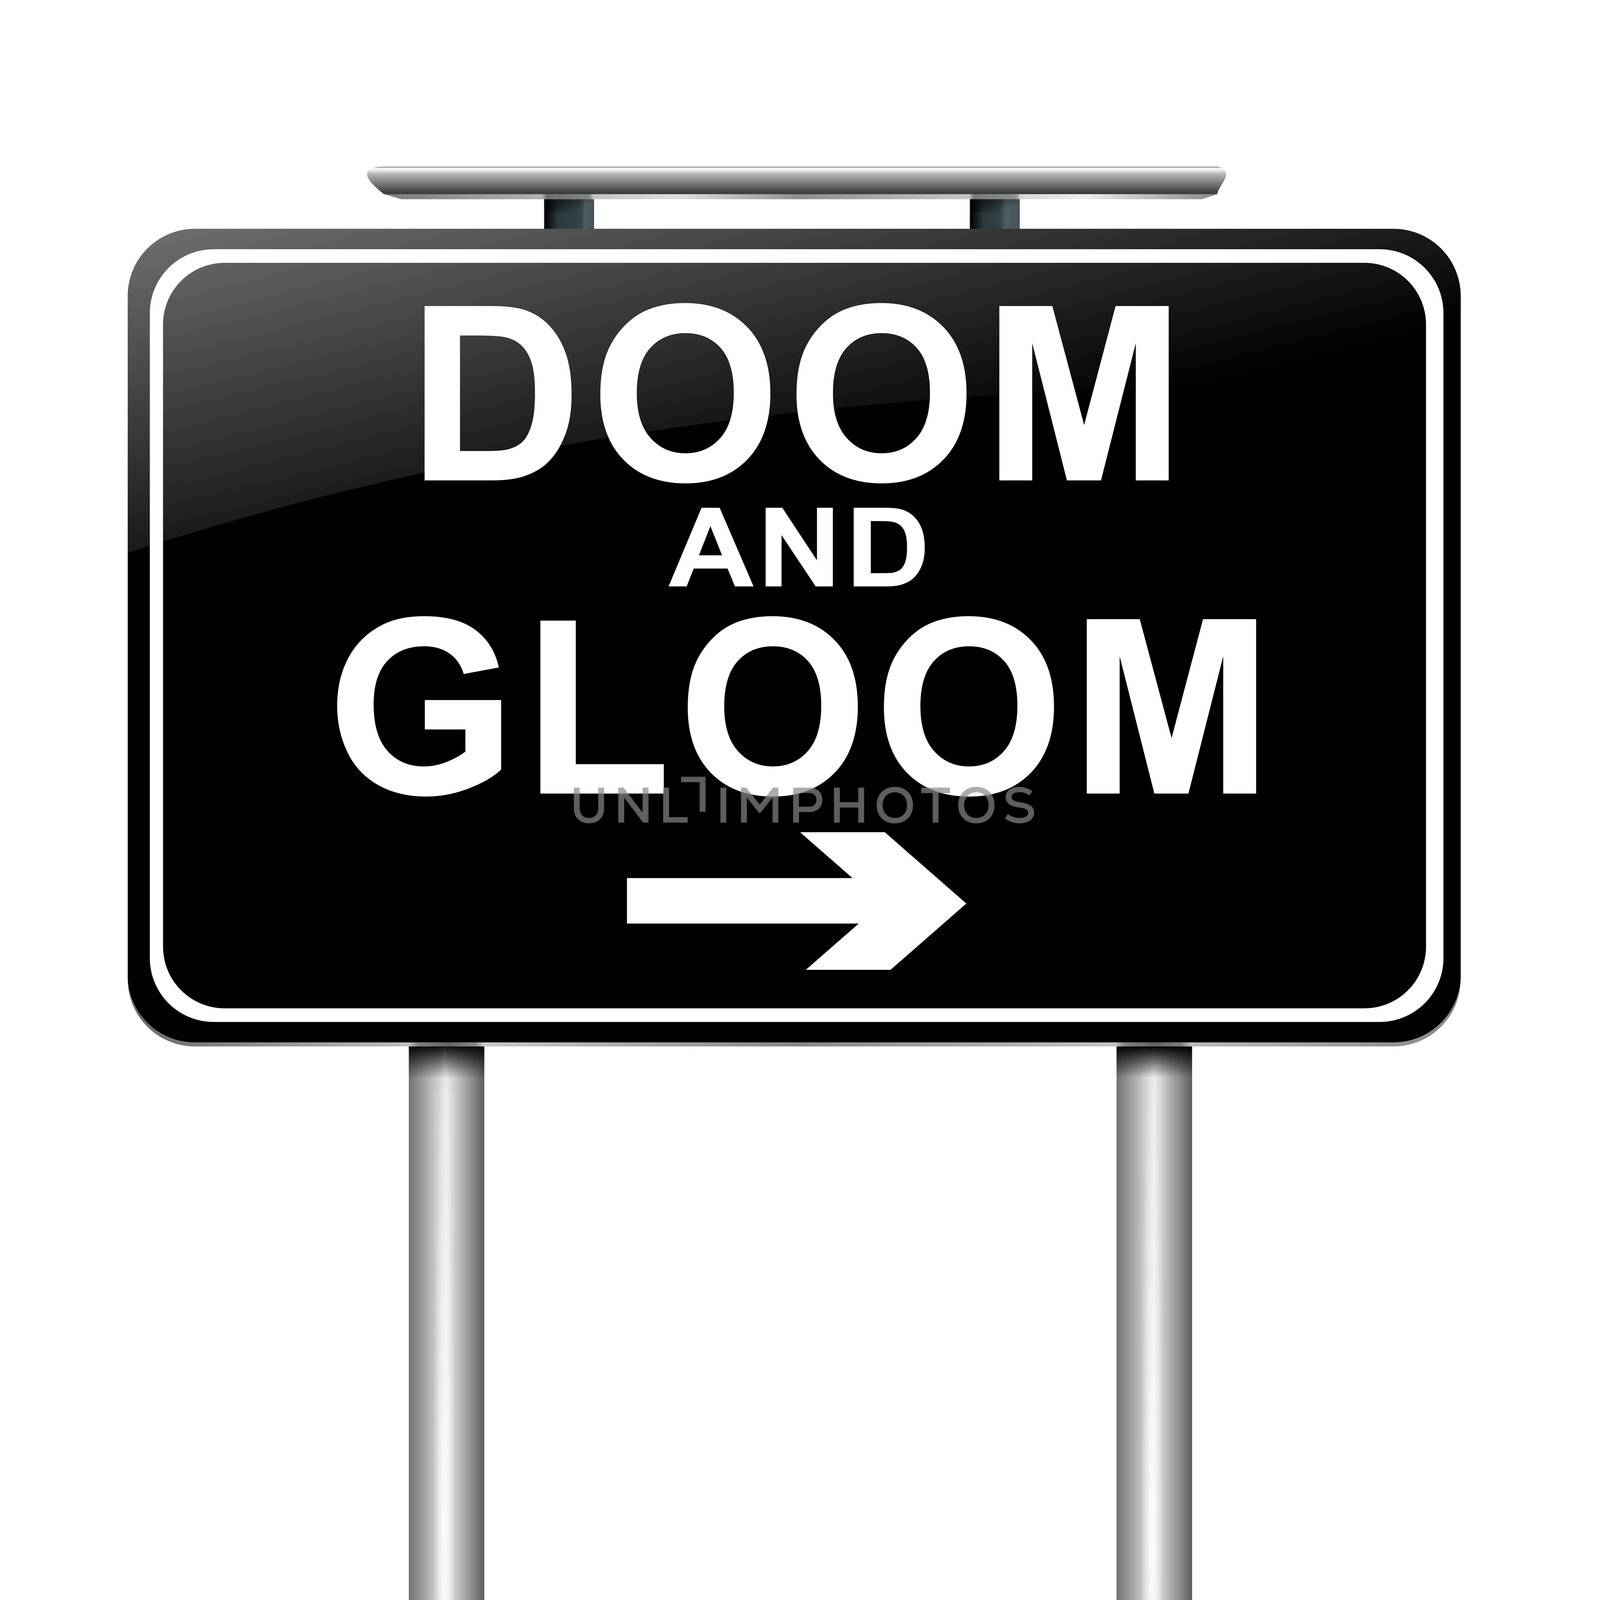 Doom and gloom concept. by 72soul